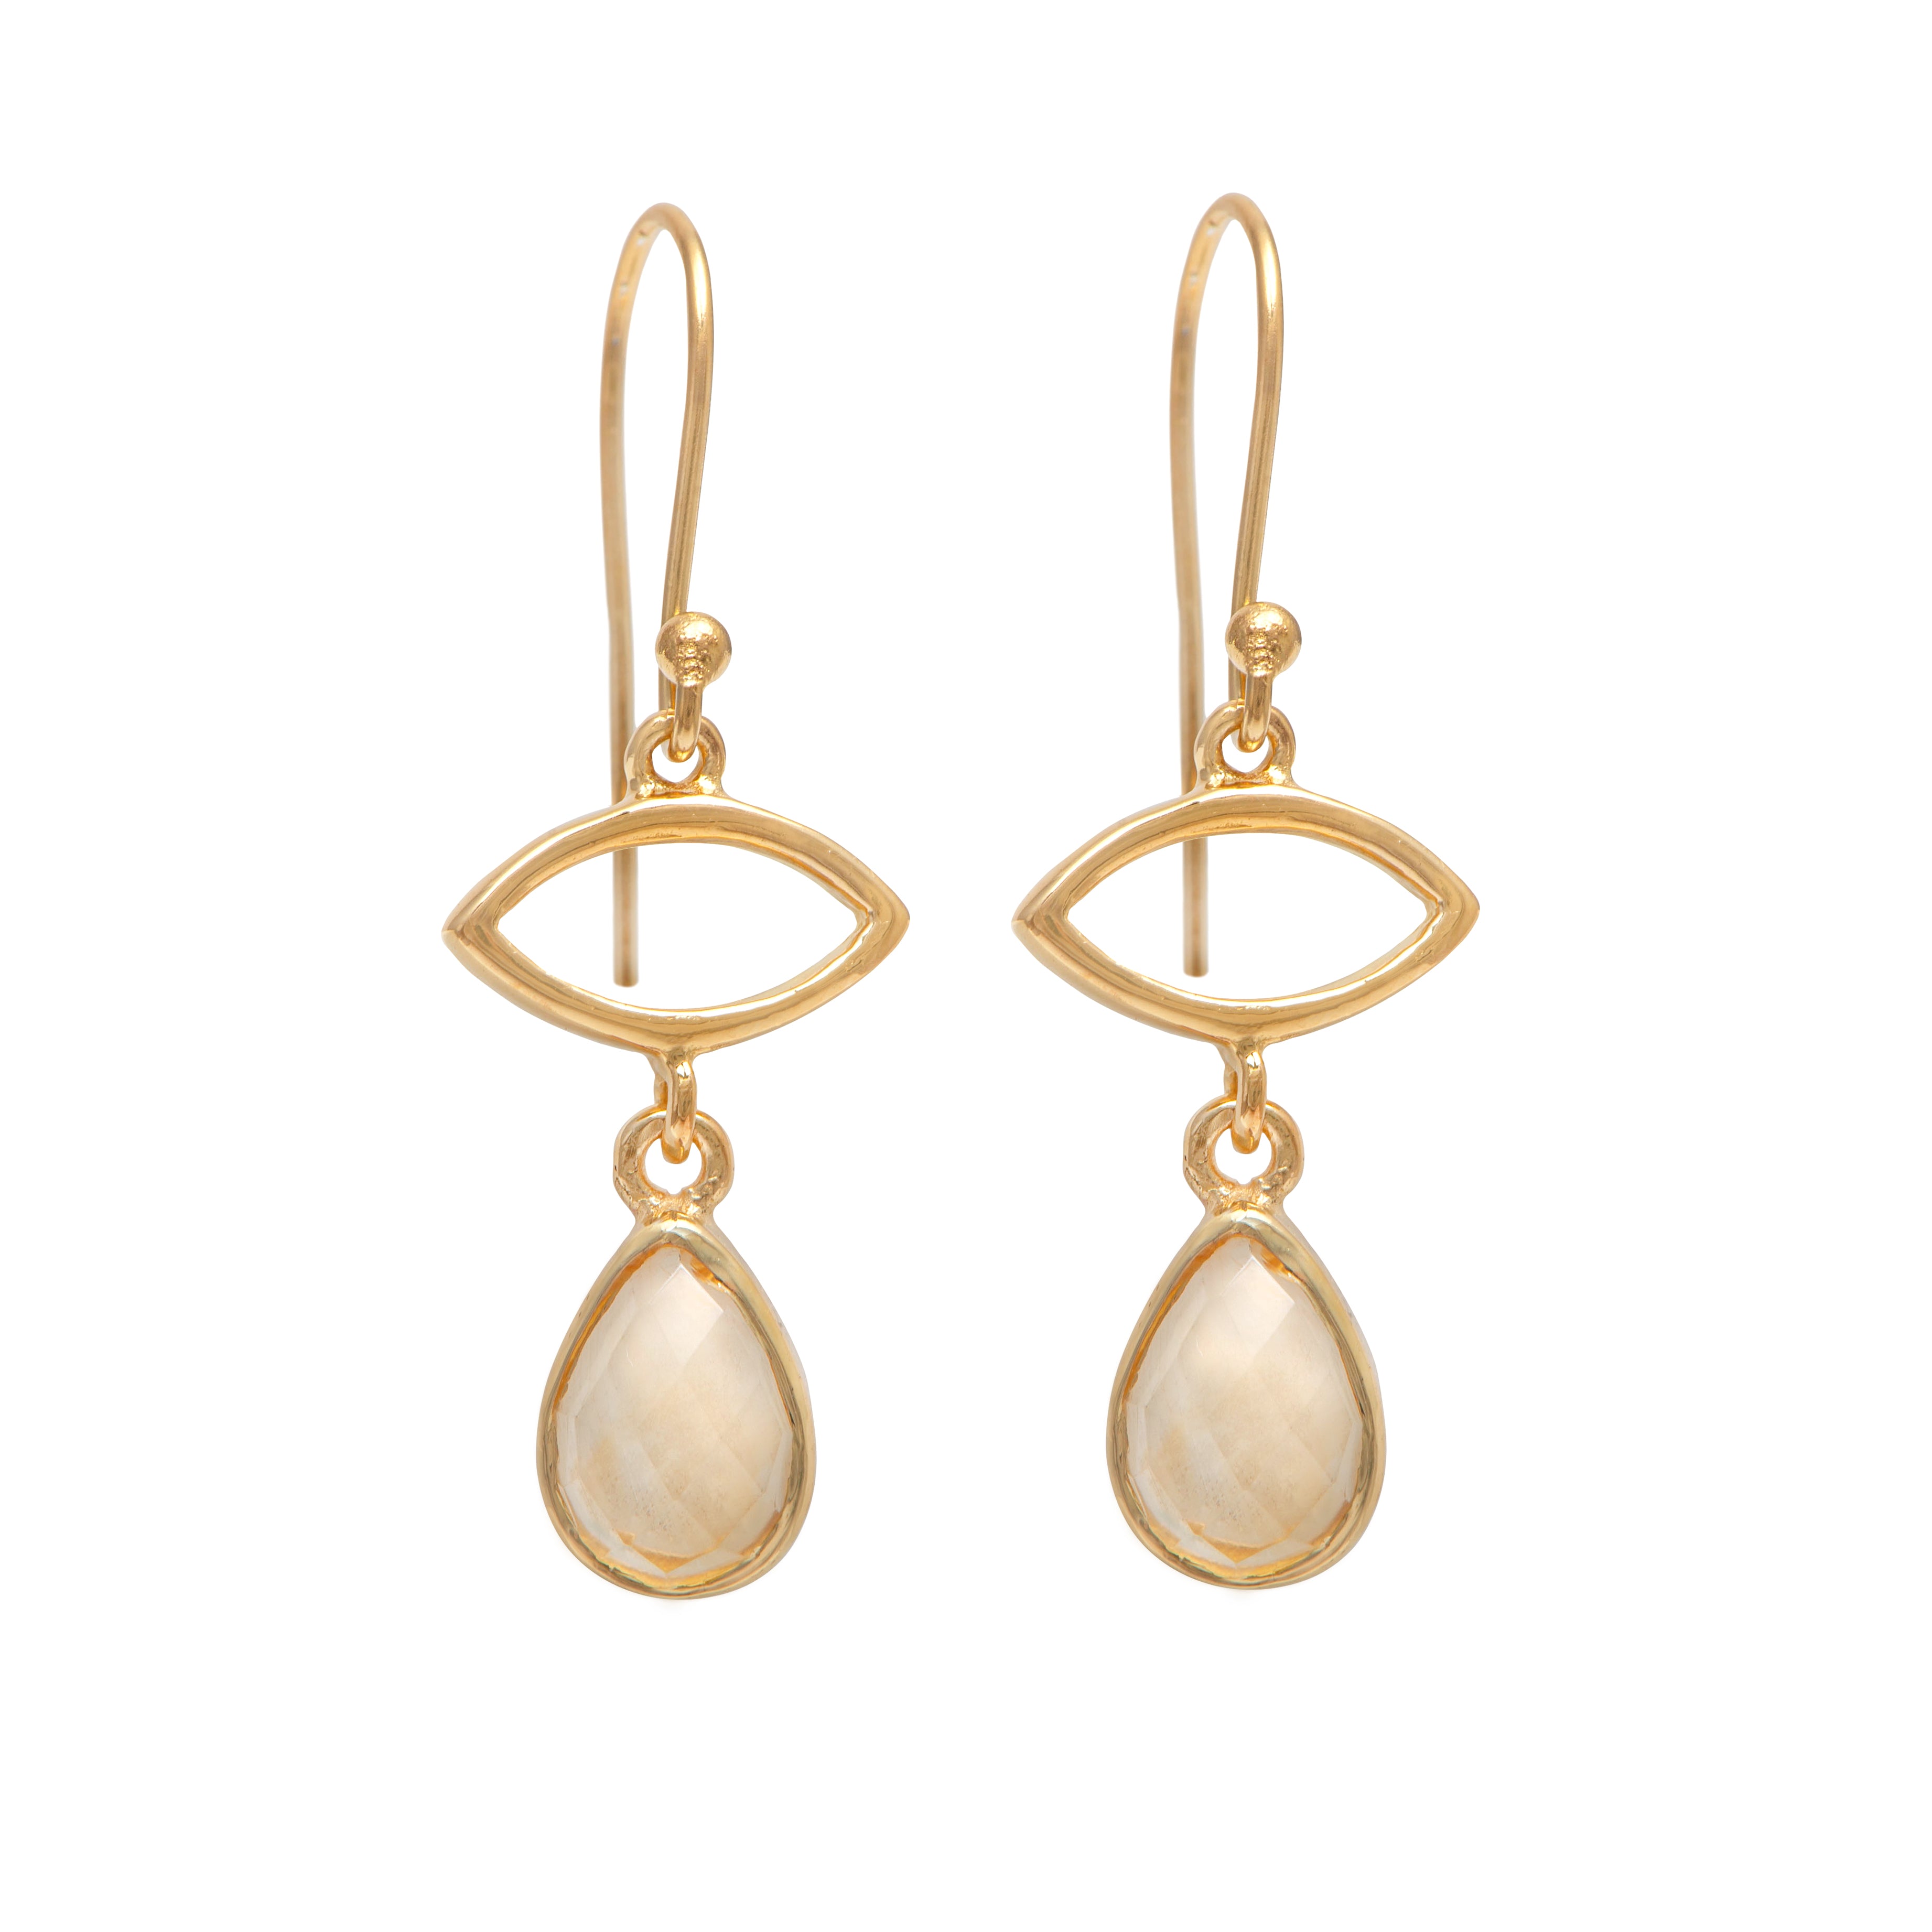 Gold Plated Drop Earrings with Citrine Gemstone